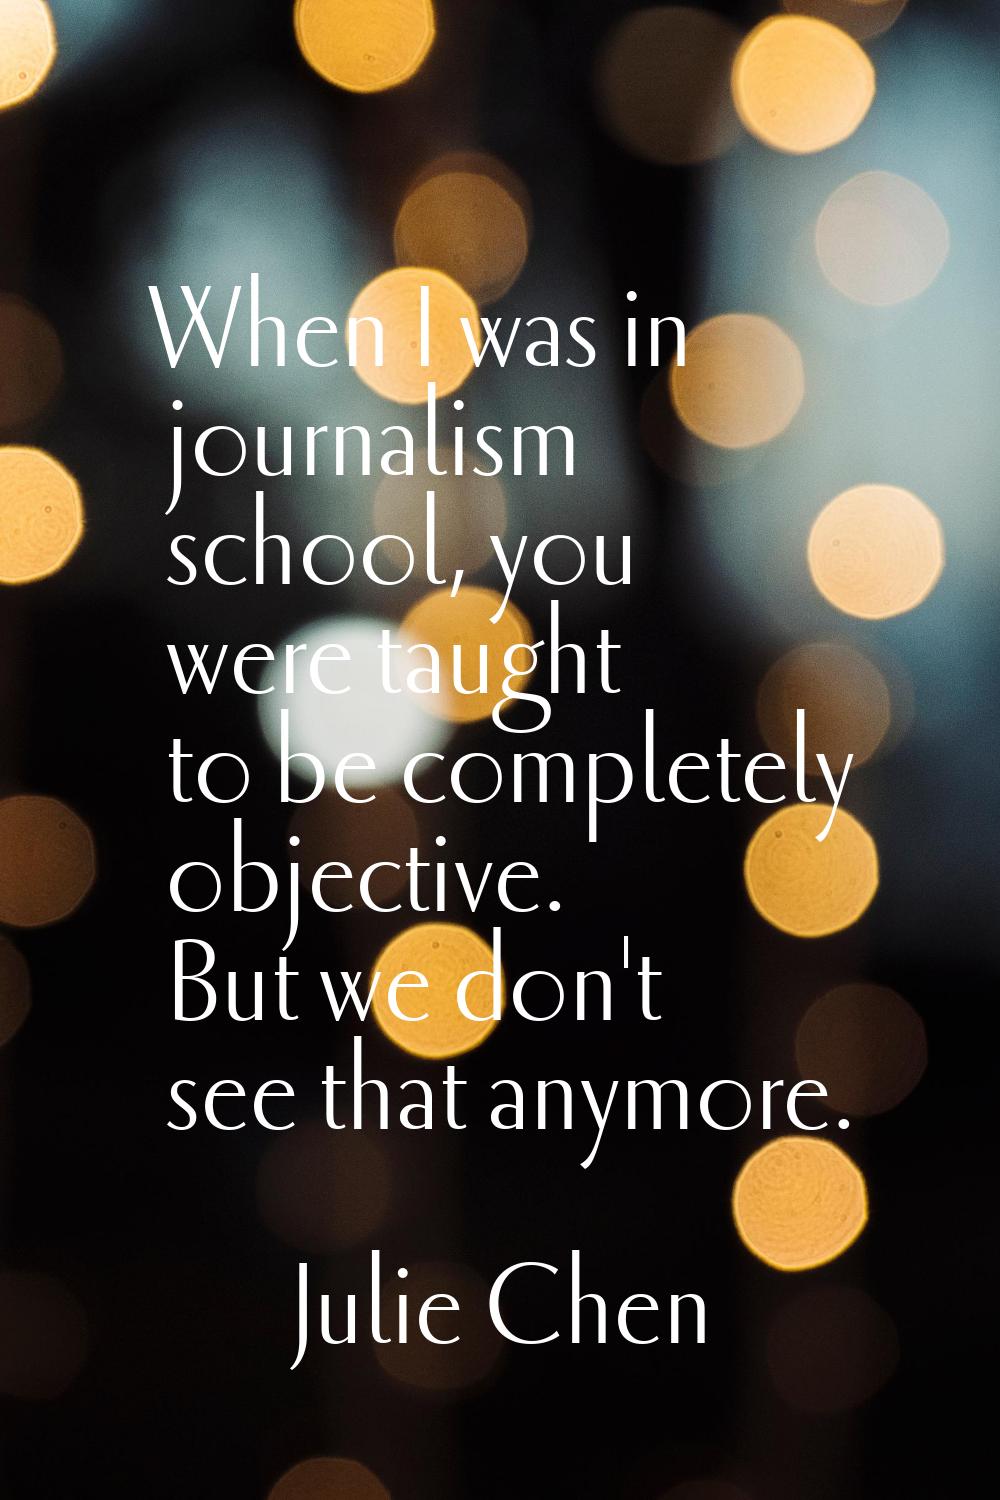 When I was in journalism school, you were taught to be completely objective. But we don't see that 